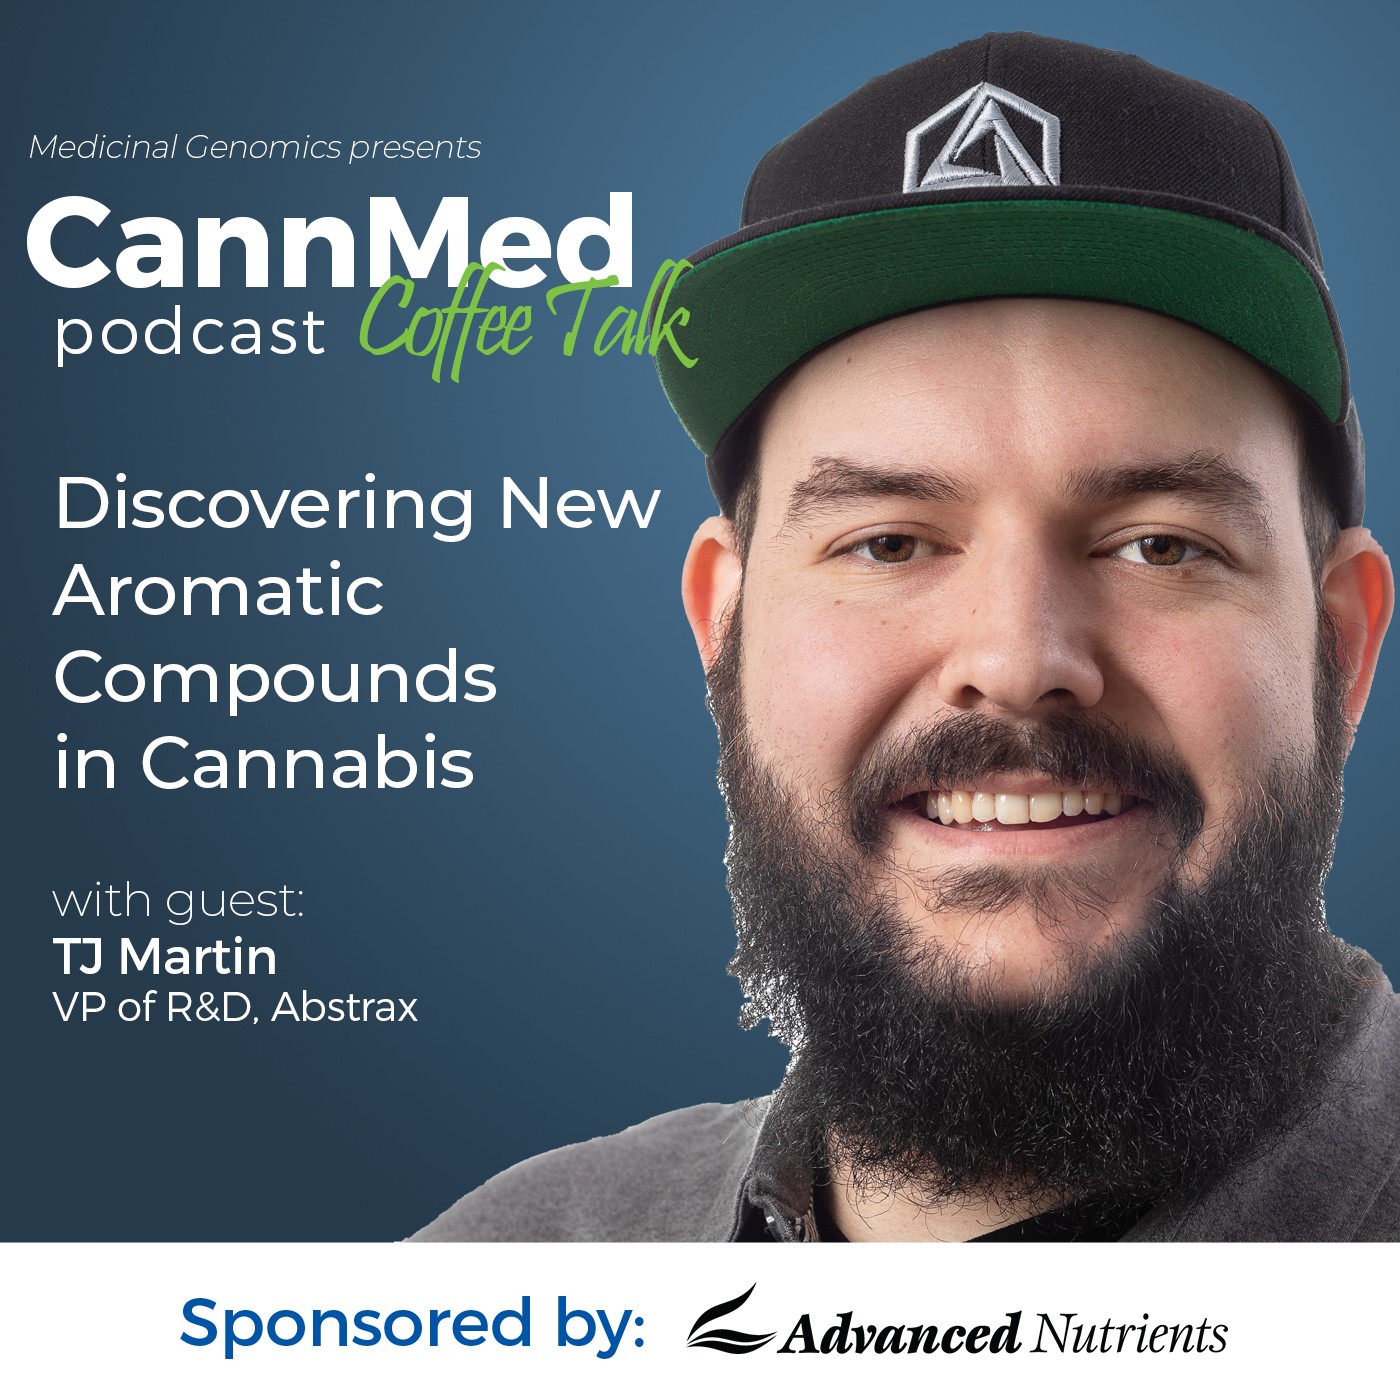 Featured image for “Discovering New Aromatic Compounds in Cannabis with TJ Martin”